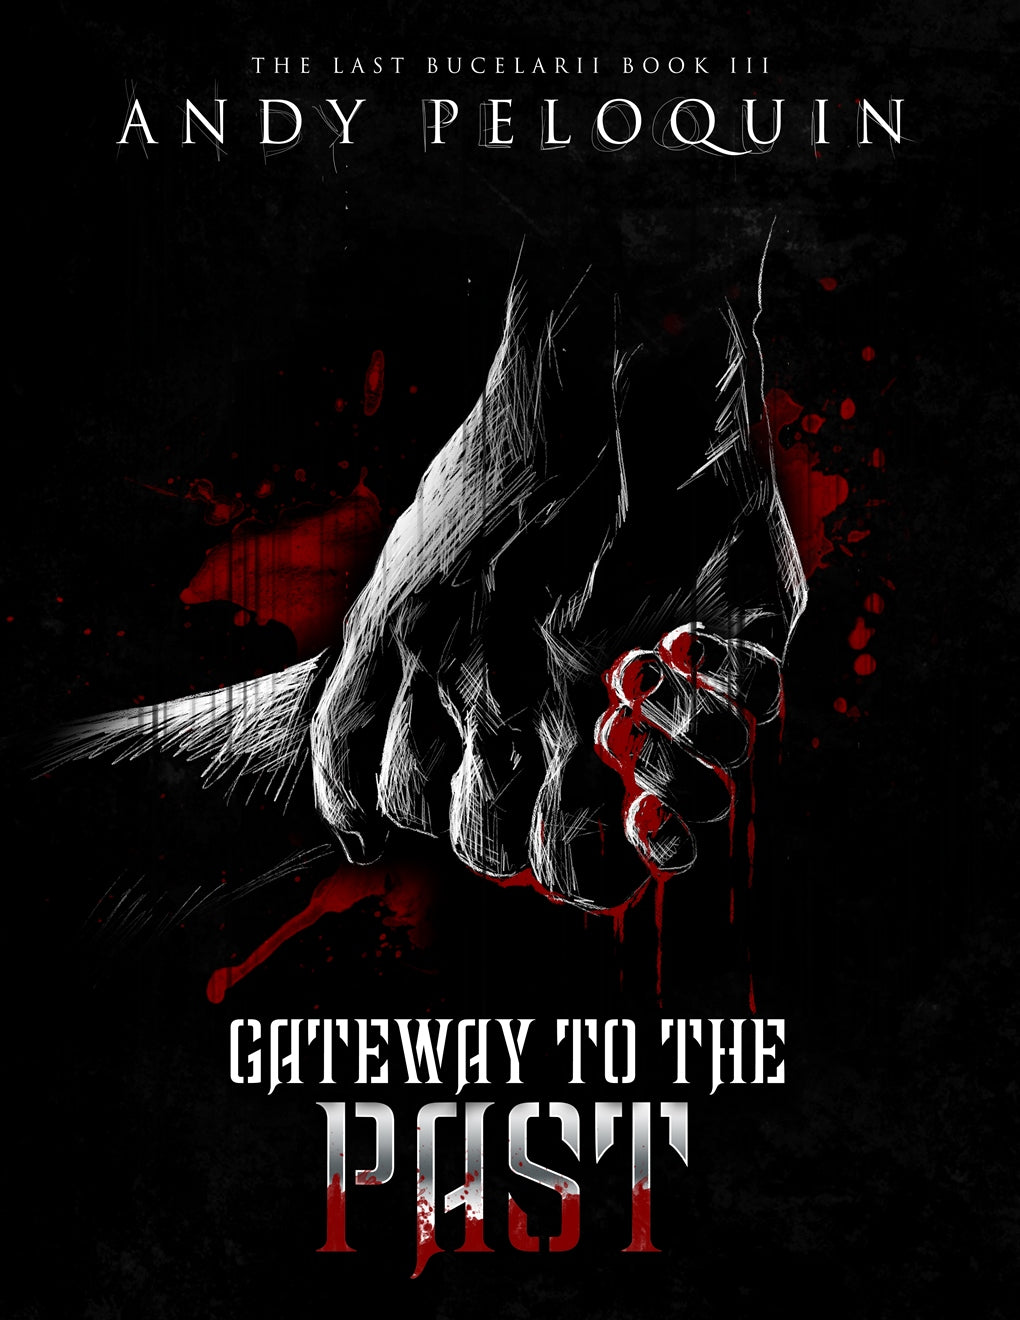 Book Review: Gateway to the Past by Andy Peloquin